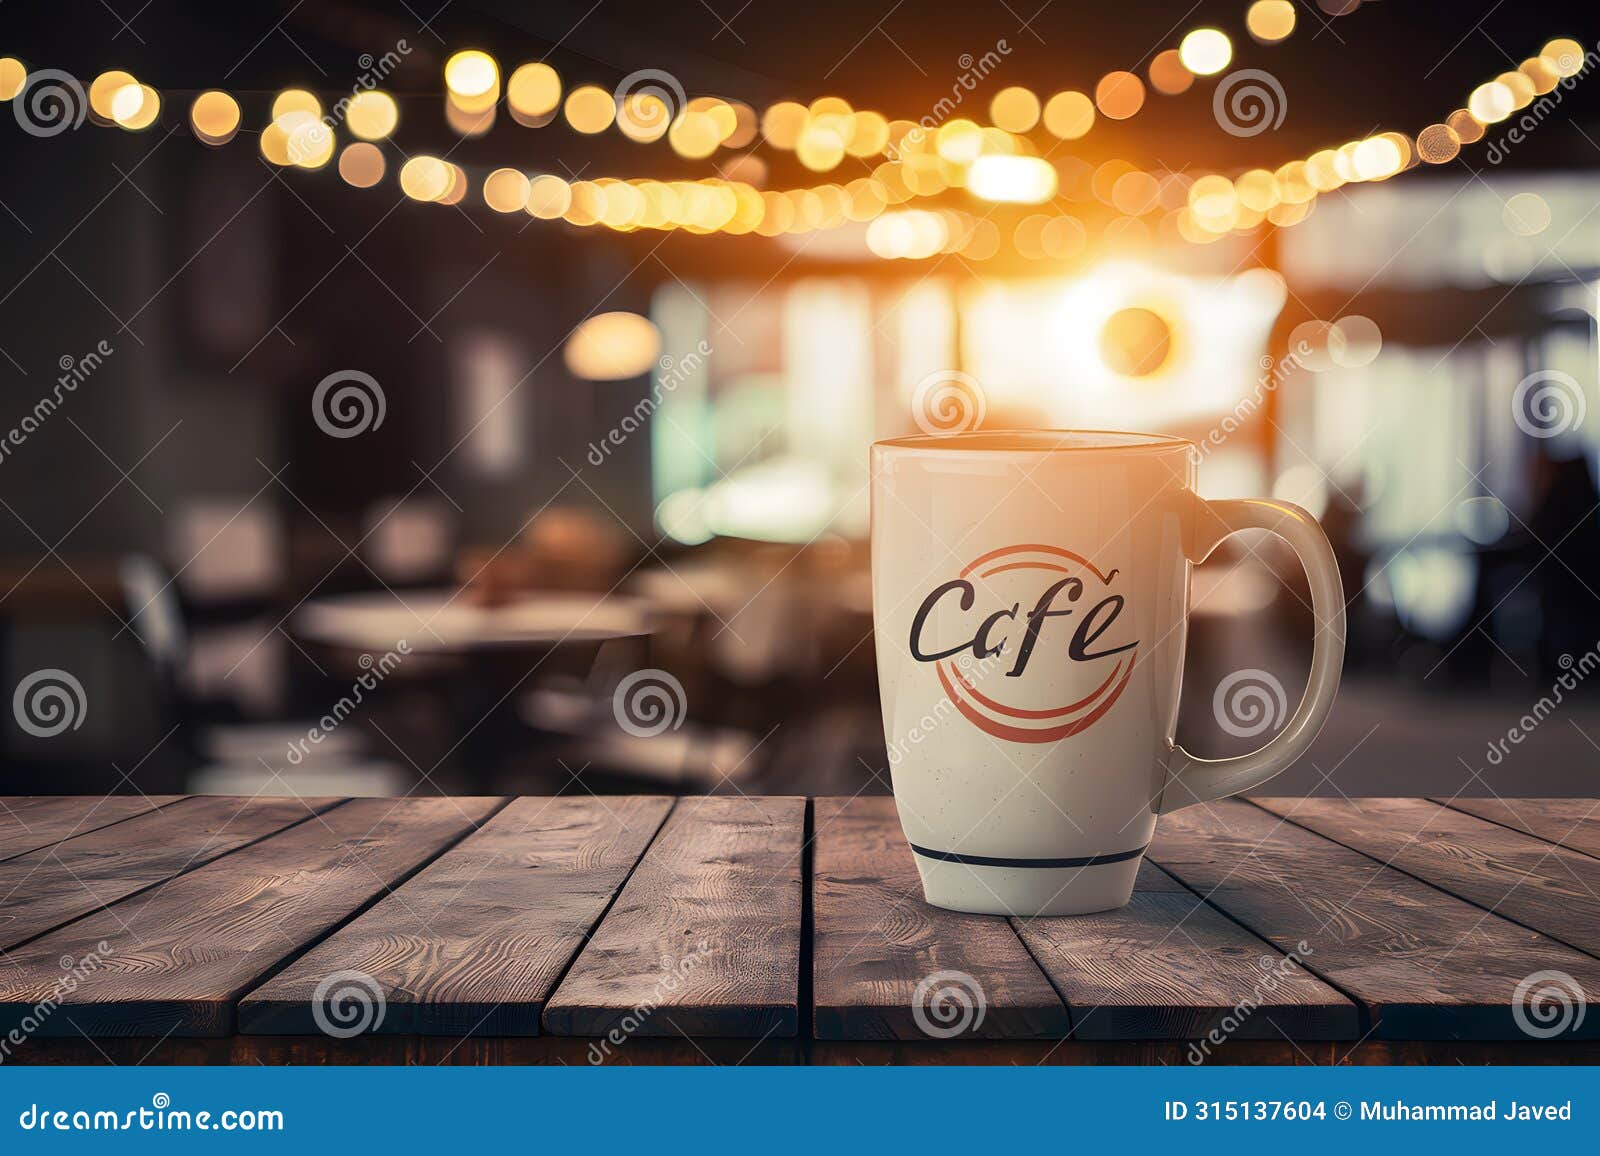 stockphoto empty wooden table with caf?? background and golden lights